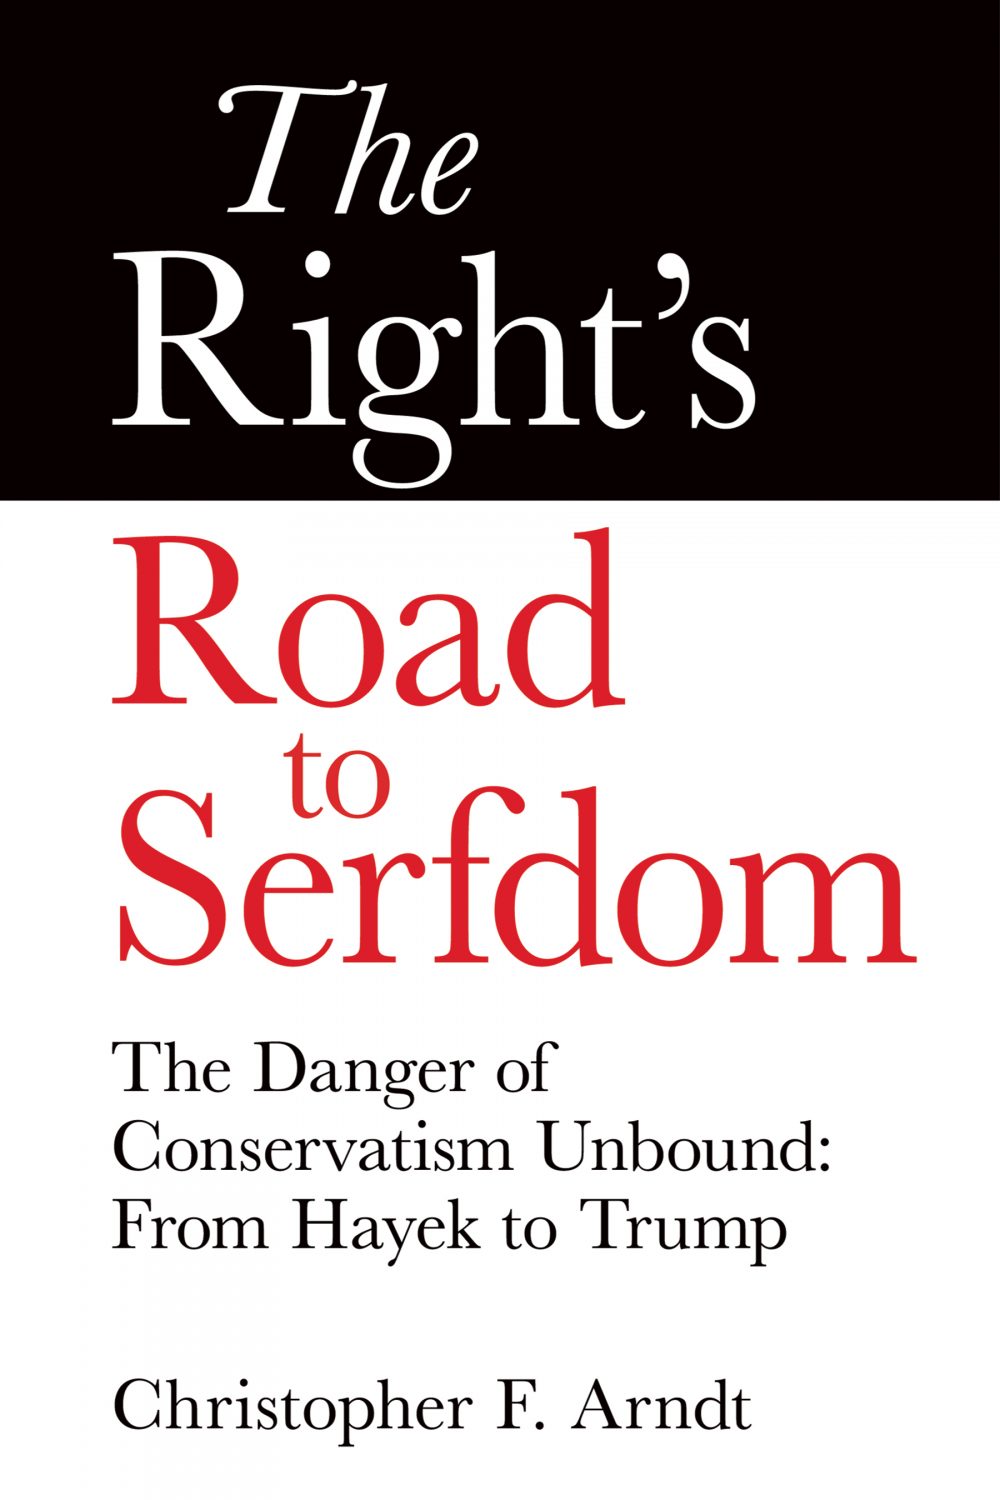 The Right's Road to Serfdom, by Chris Arndt